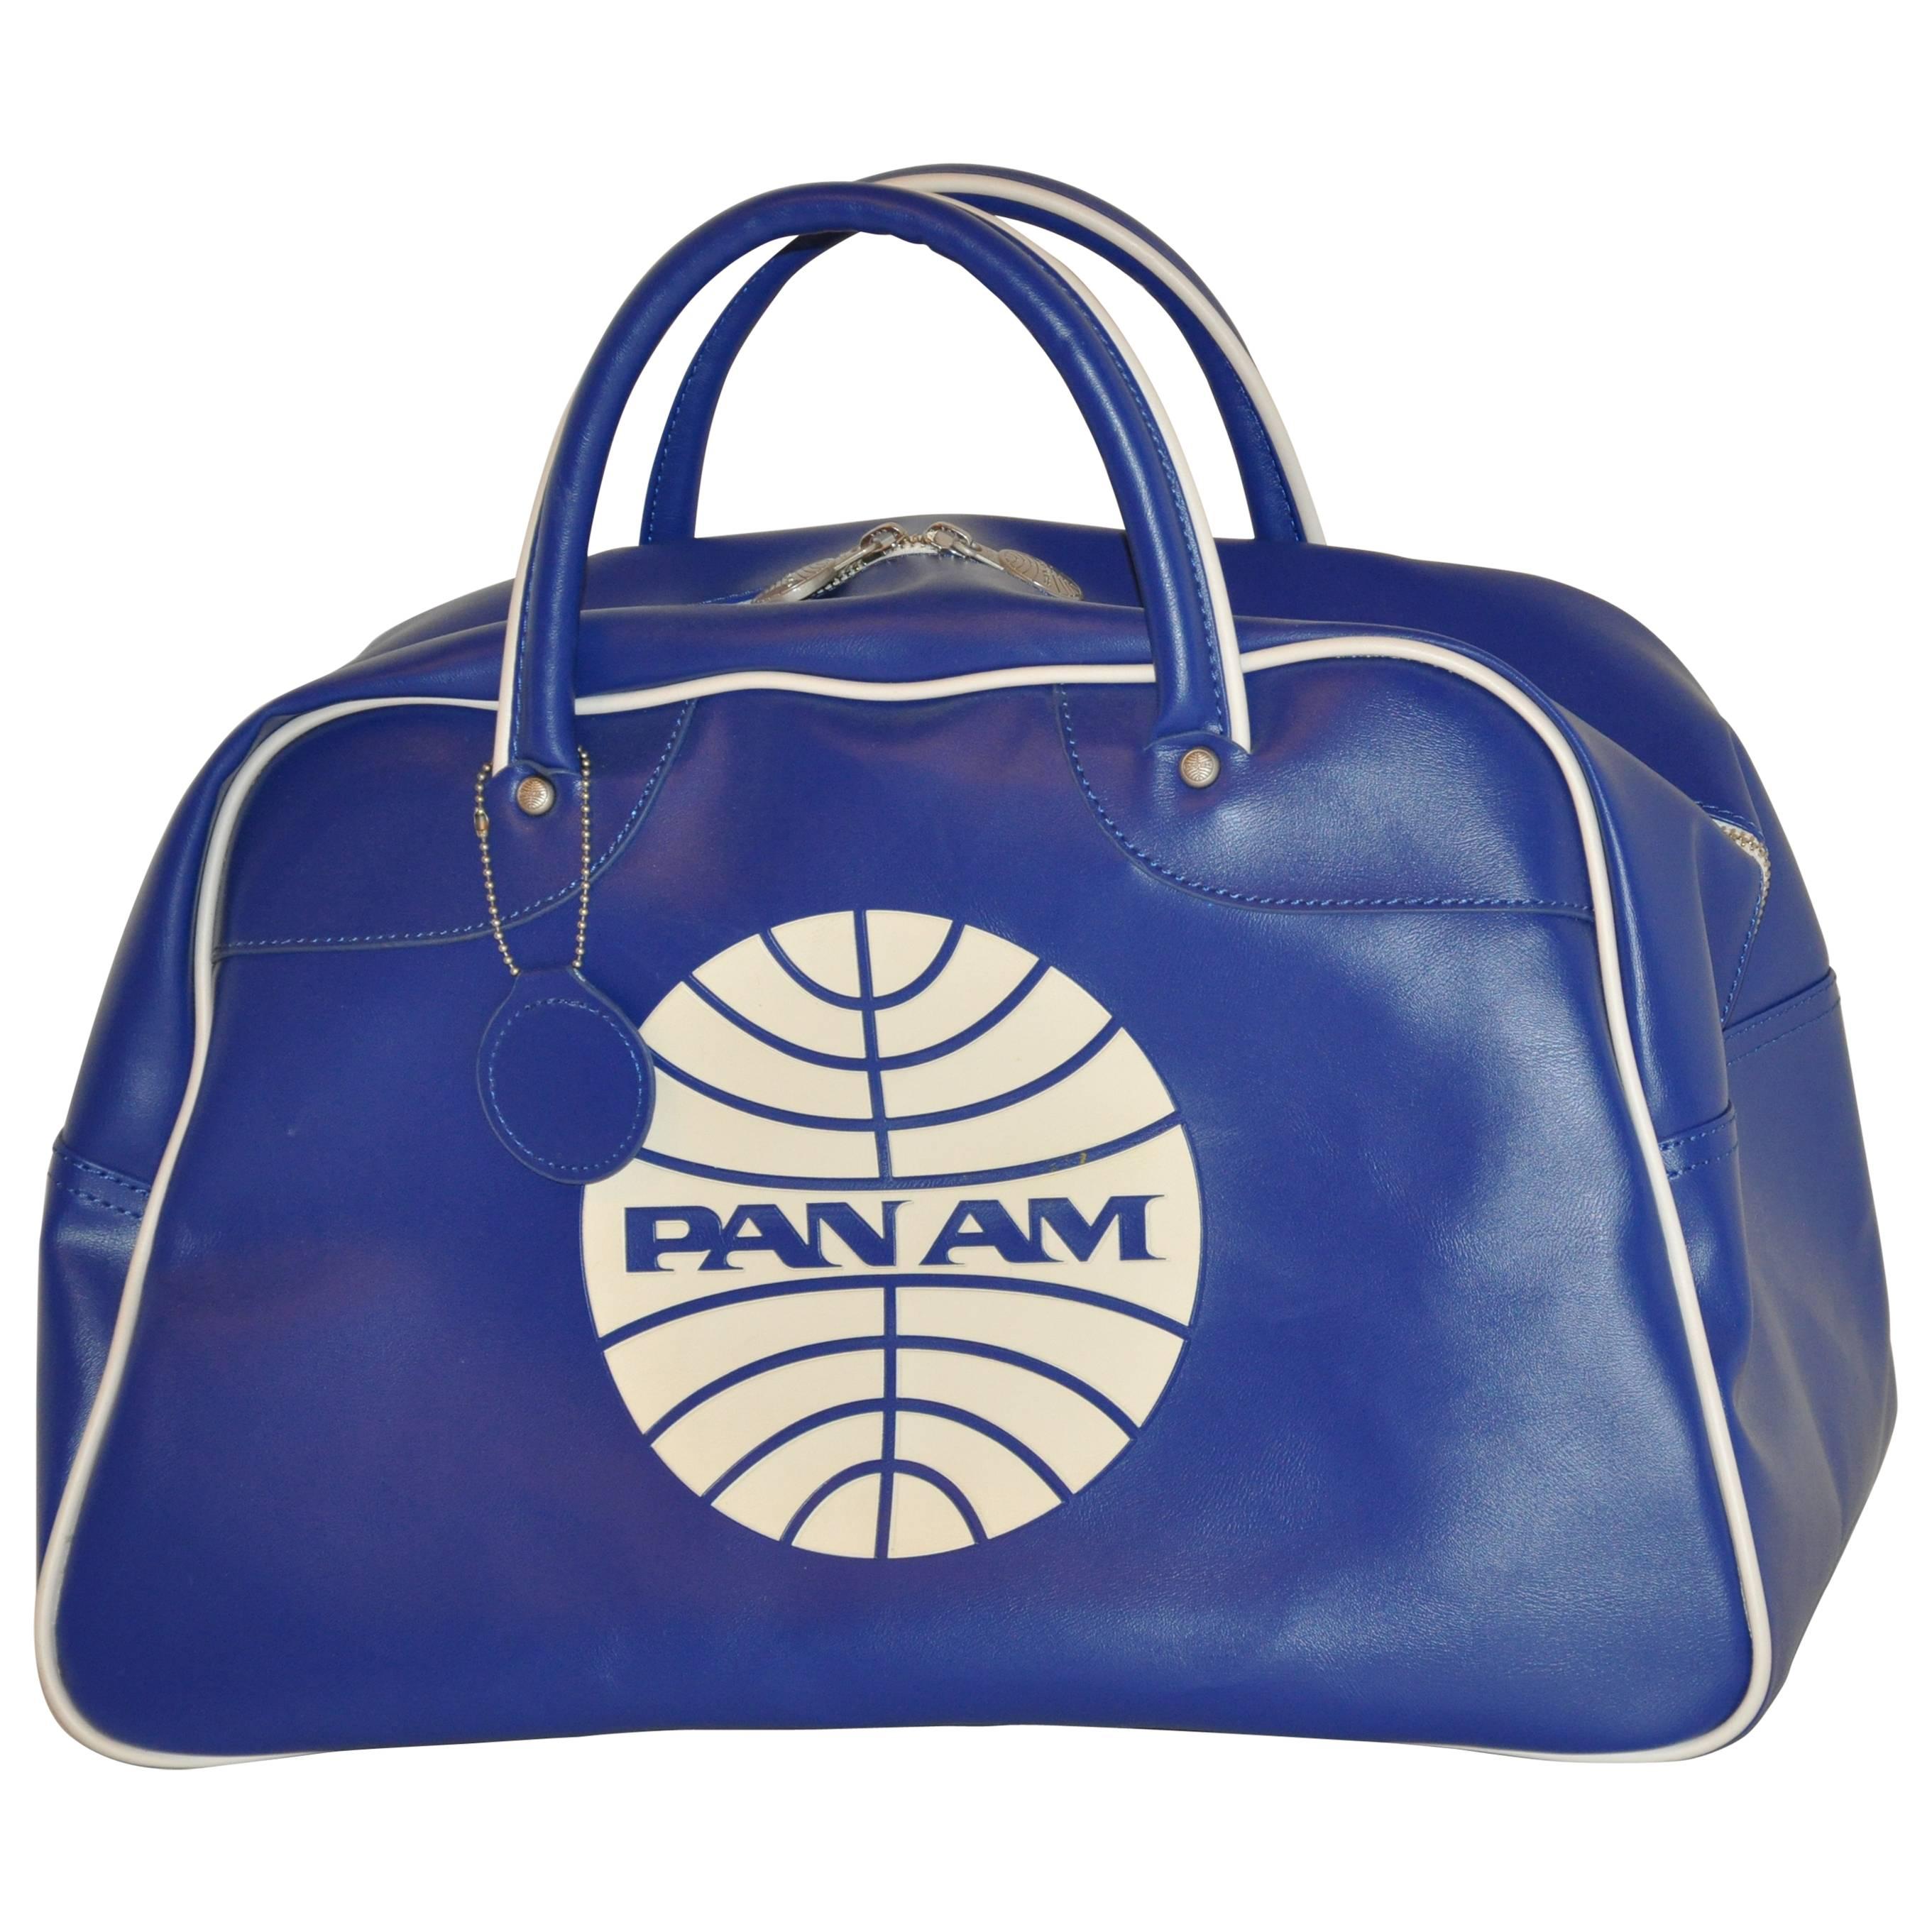 Pan Am Iconic Signature Navy & White Zipper Top Travel Tote